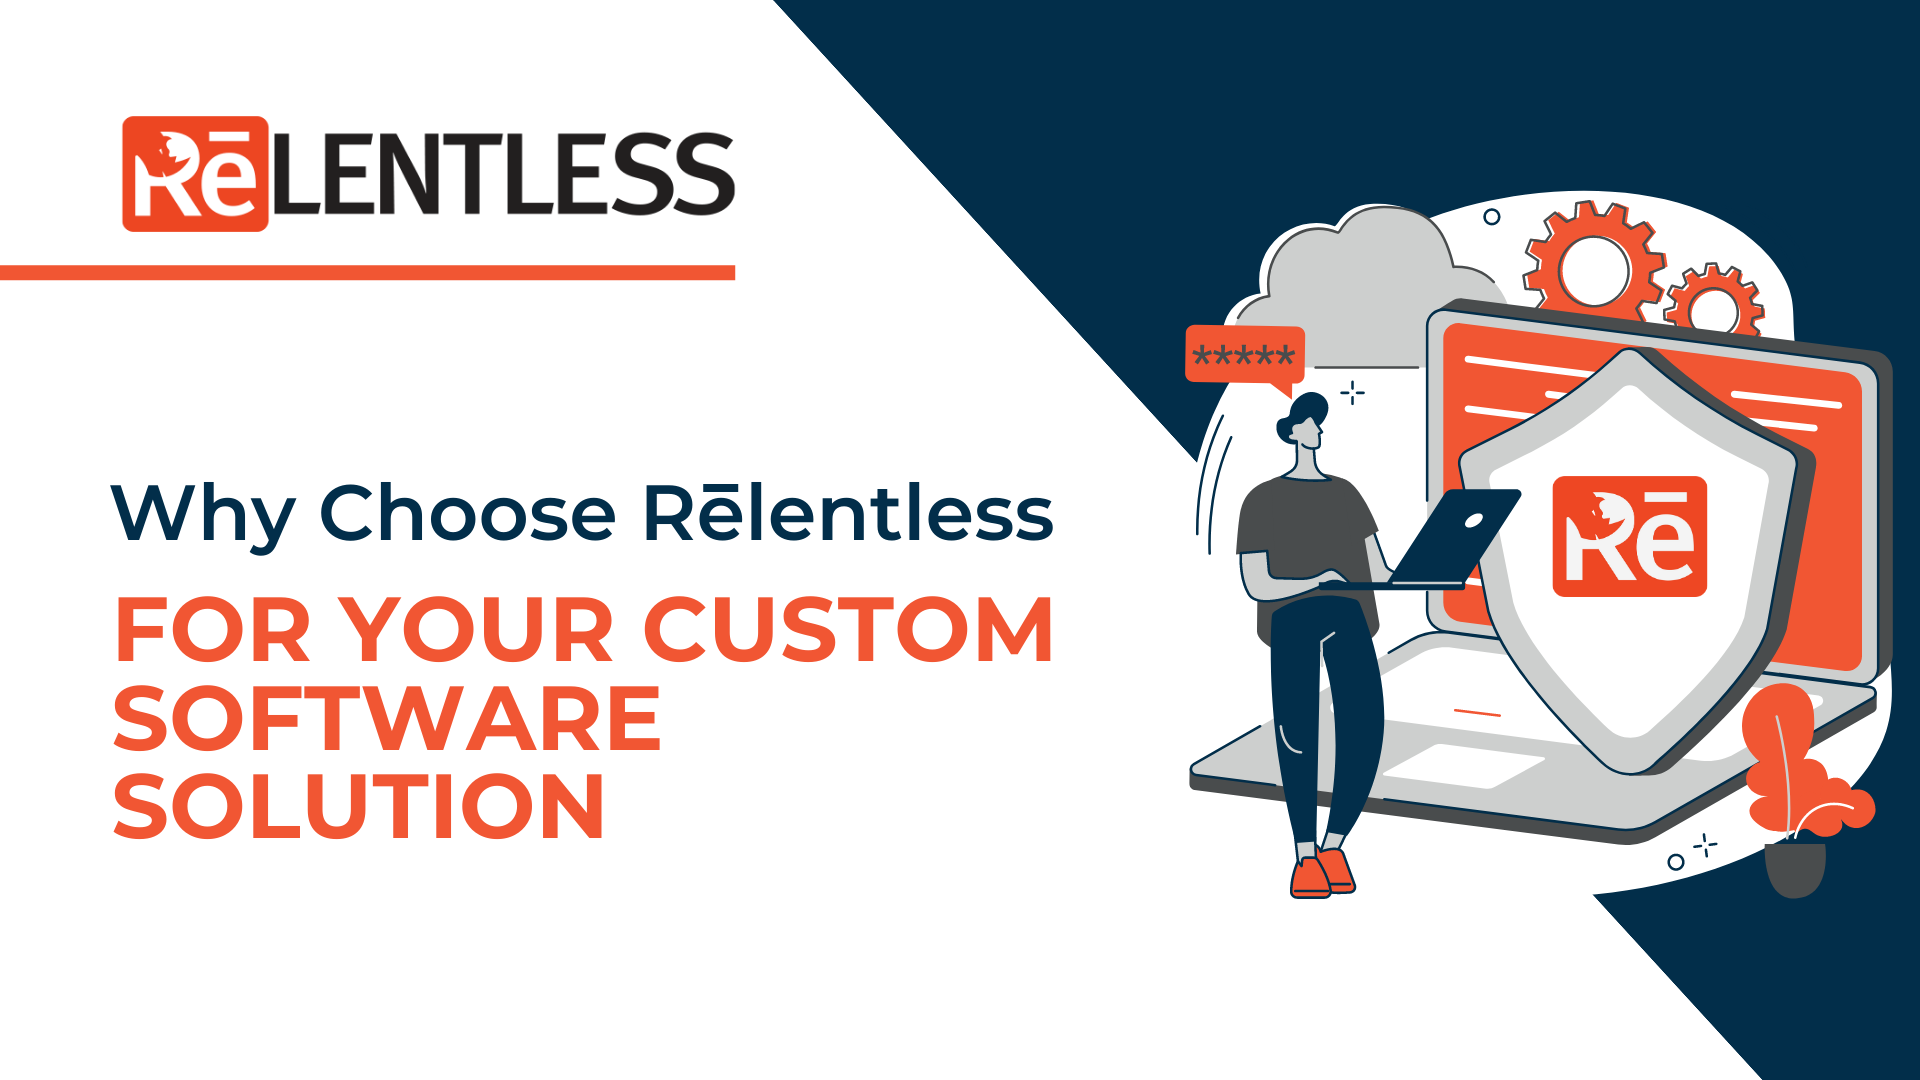 Why Choose Relentless for Your Custom Software Solution